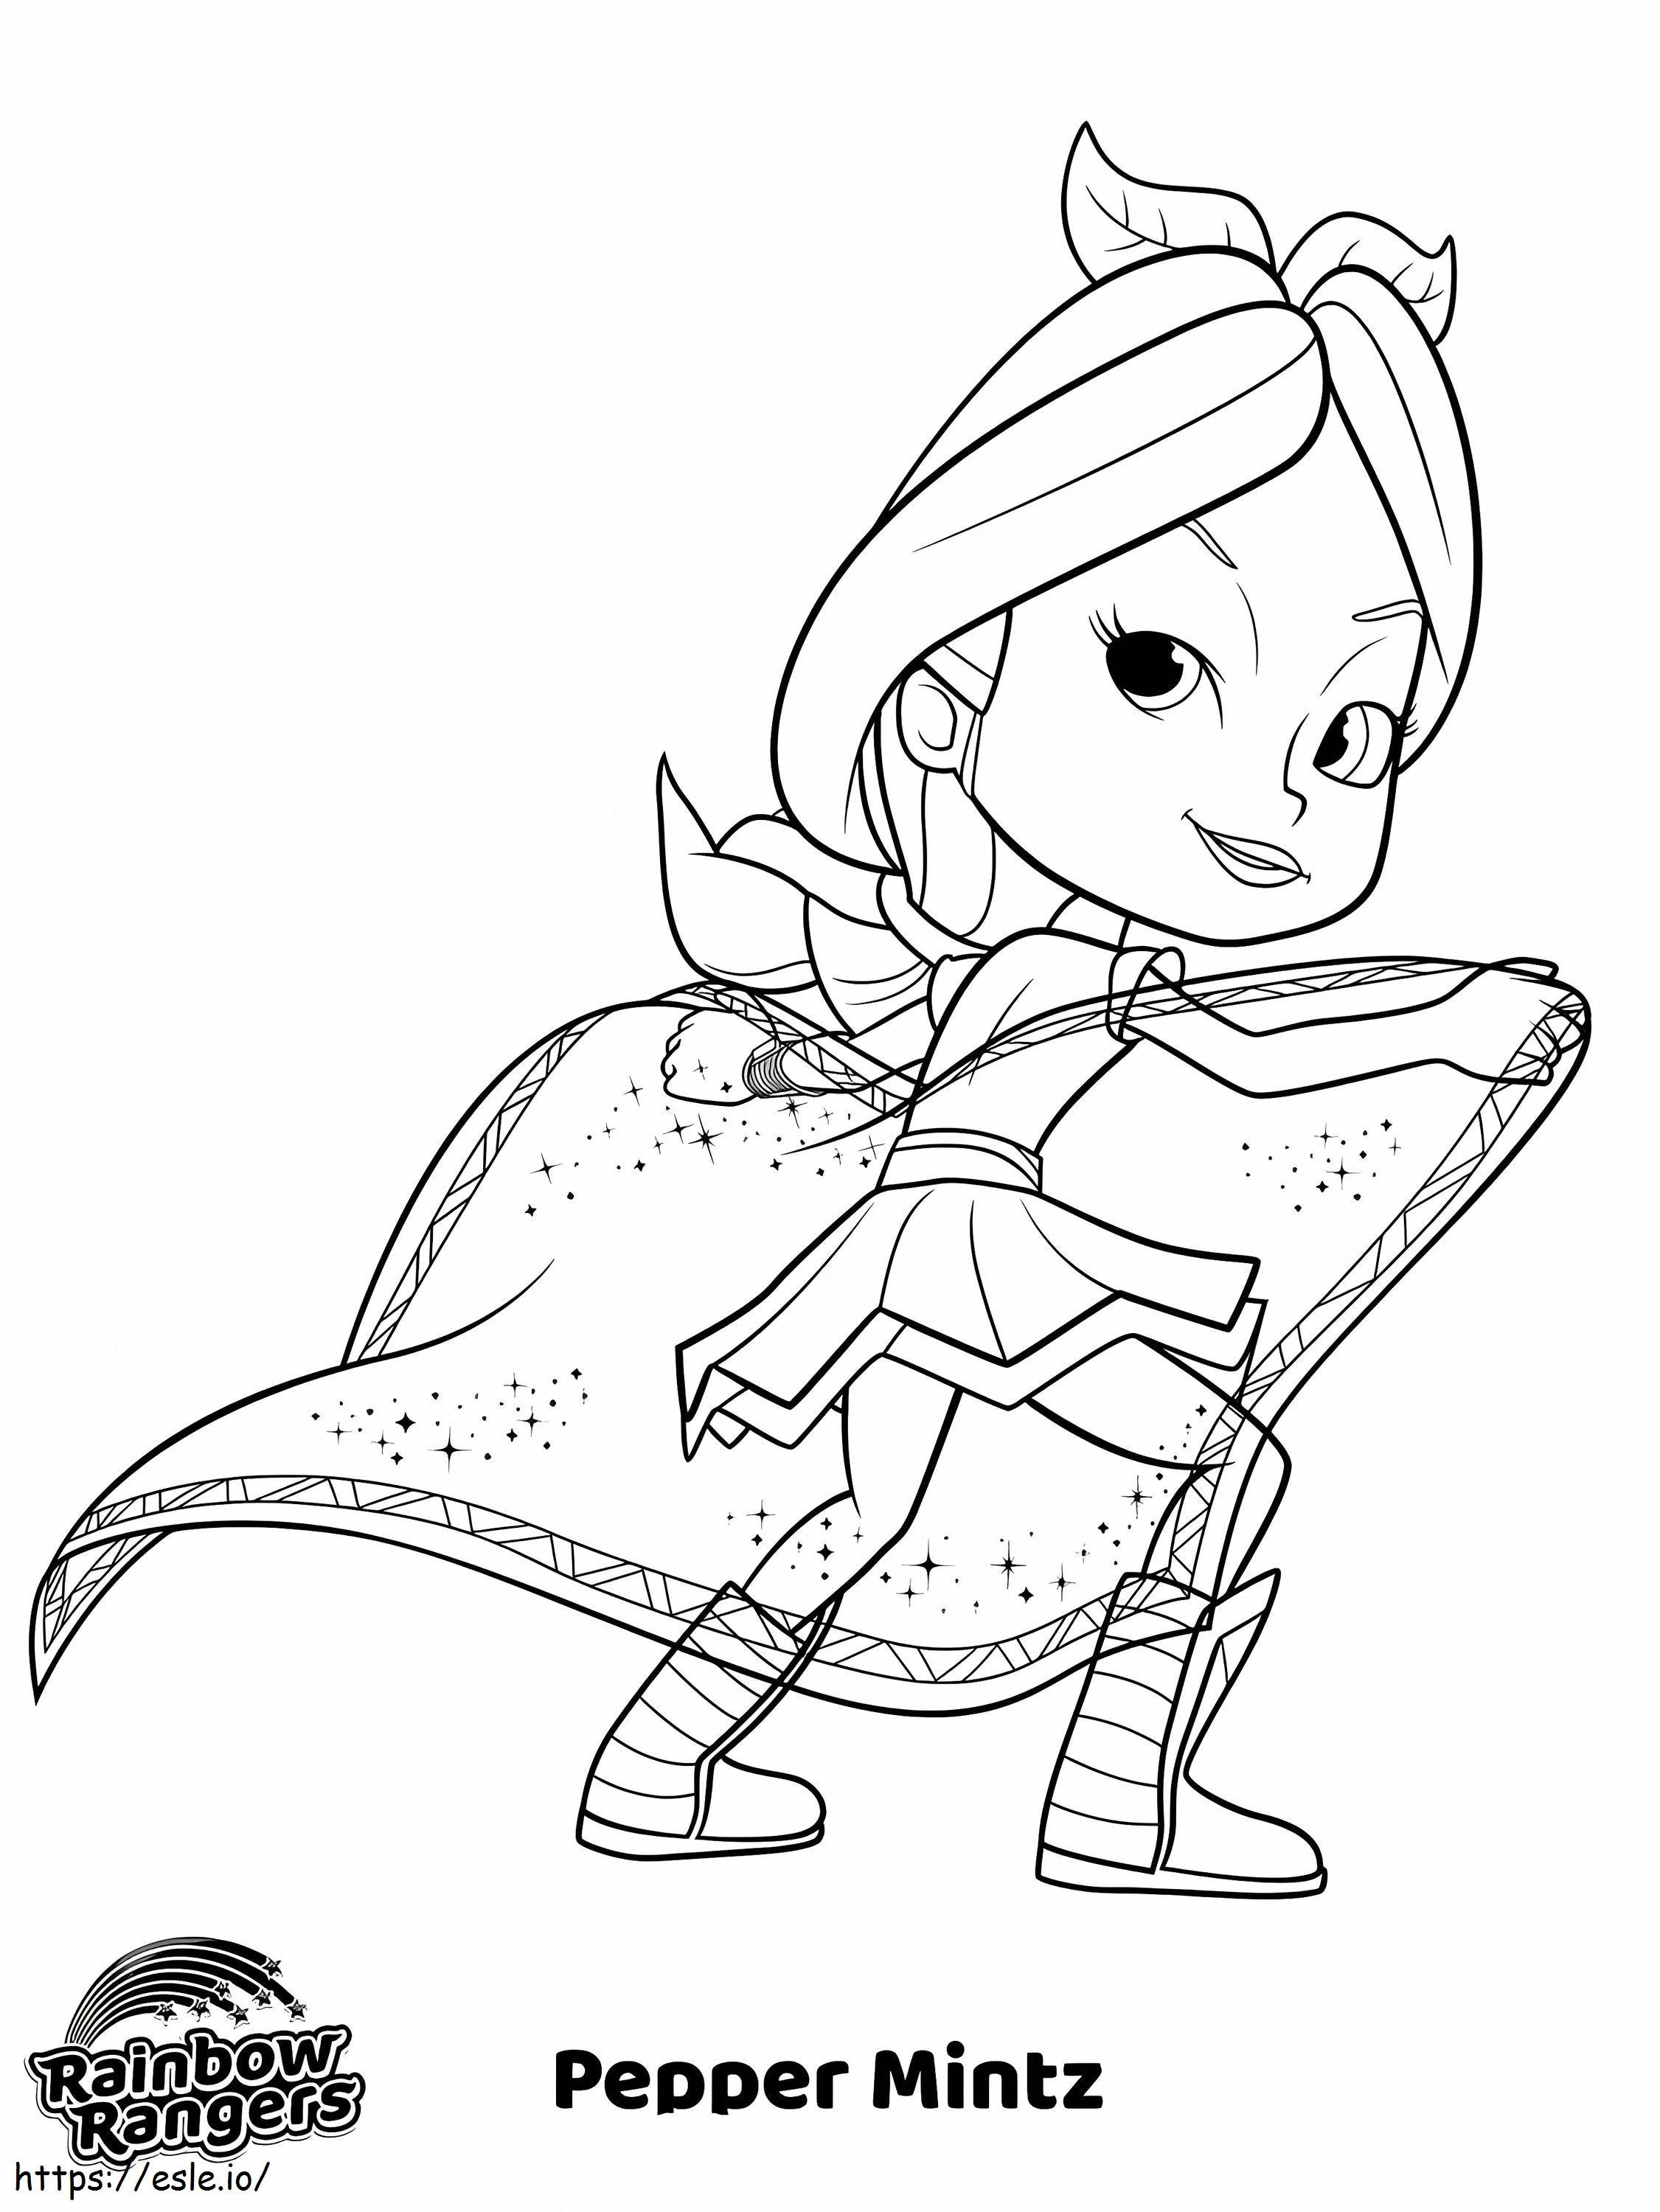 15512868739 Year Old Girl Pepper Mintz Rainbow Rangers coloring page